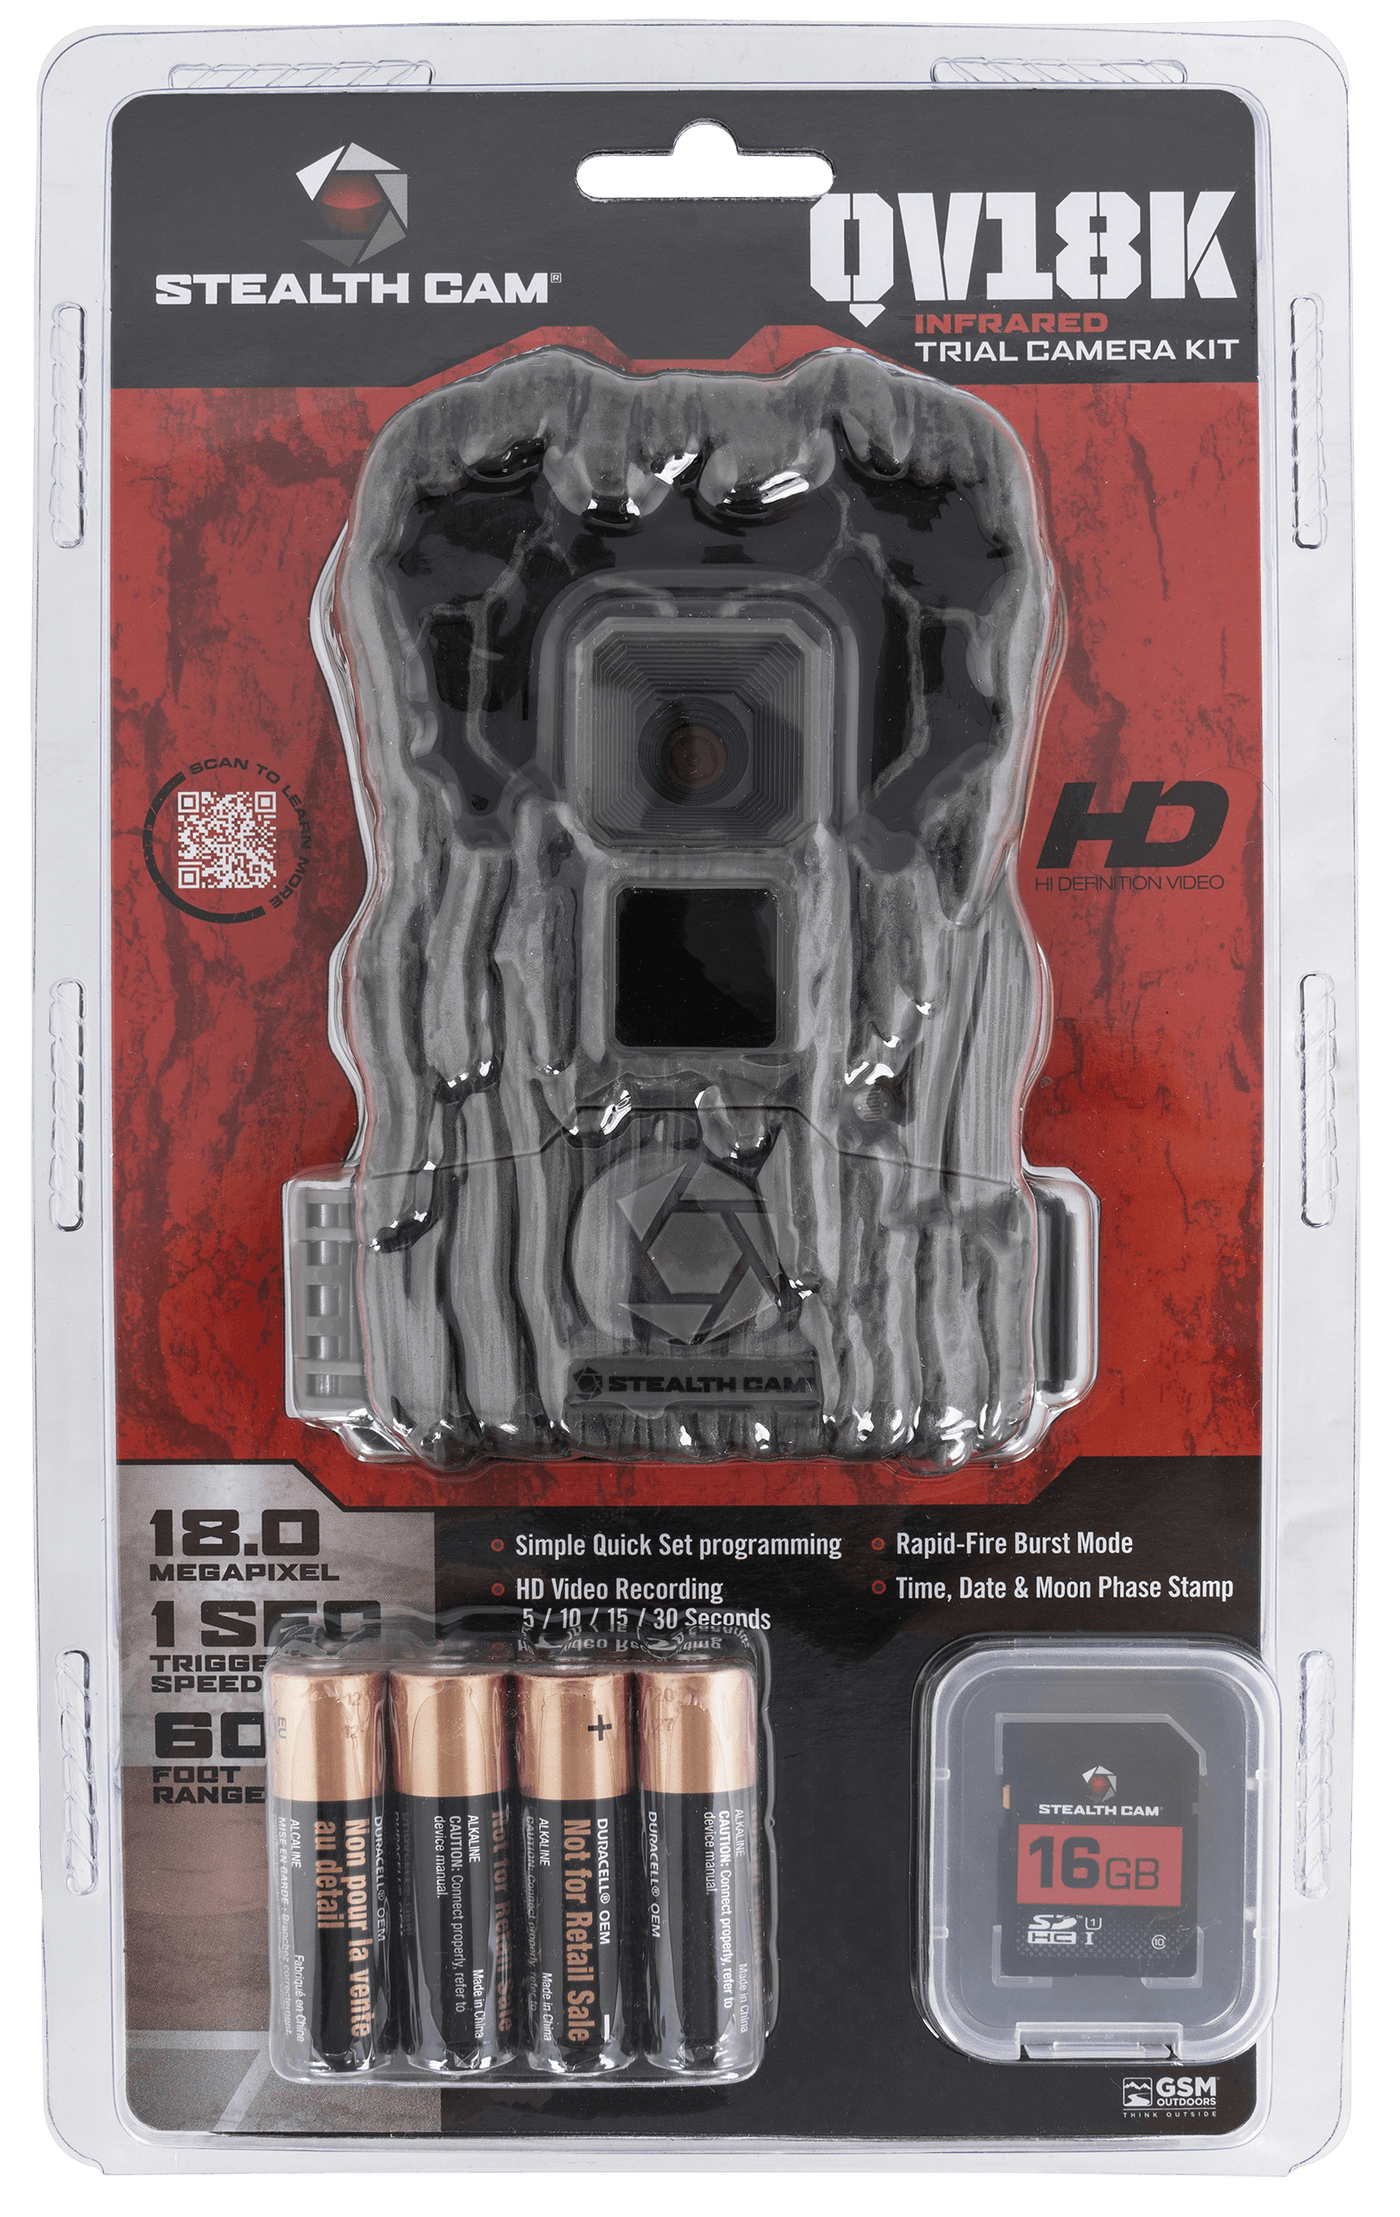 Stealth Cam Stealth Cam , Steal Stc-qv18k     18mp Qv18 Combo Hunting